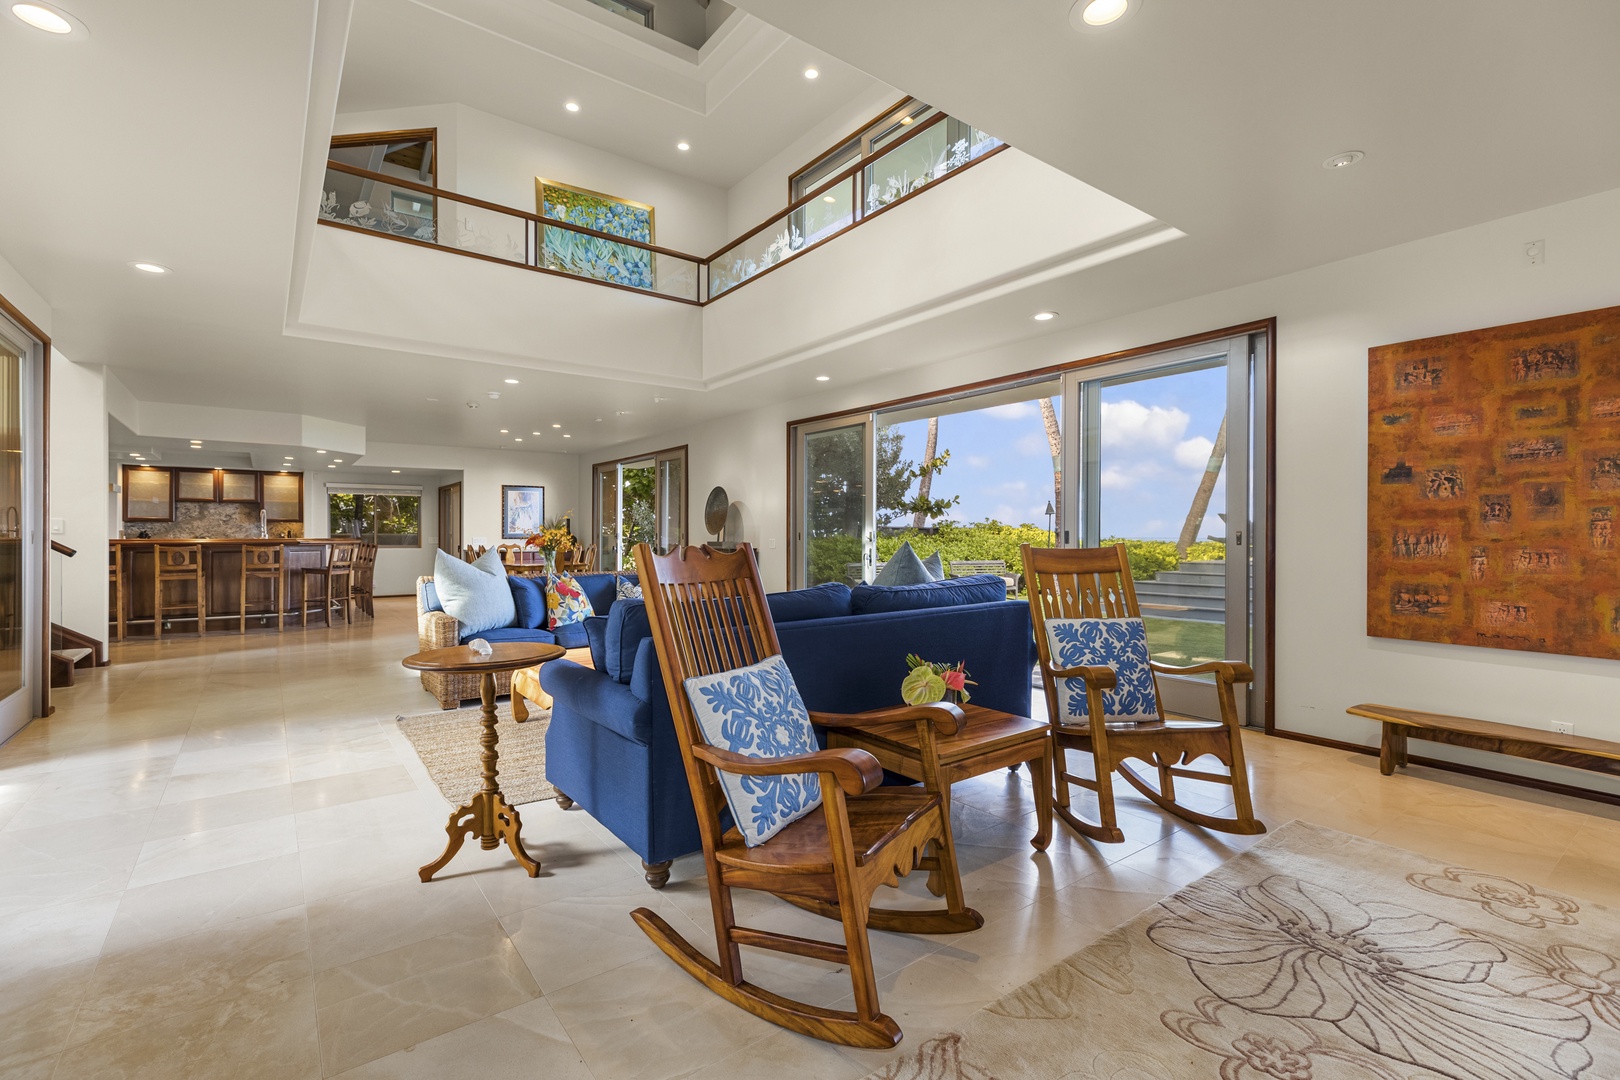 Kailua Vacation Rentals, Mokulua Sunrise - Peace and serenity awaits here with a private Koi pond, viewable from the main living area